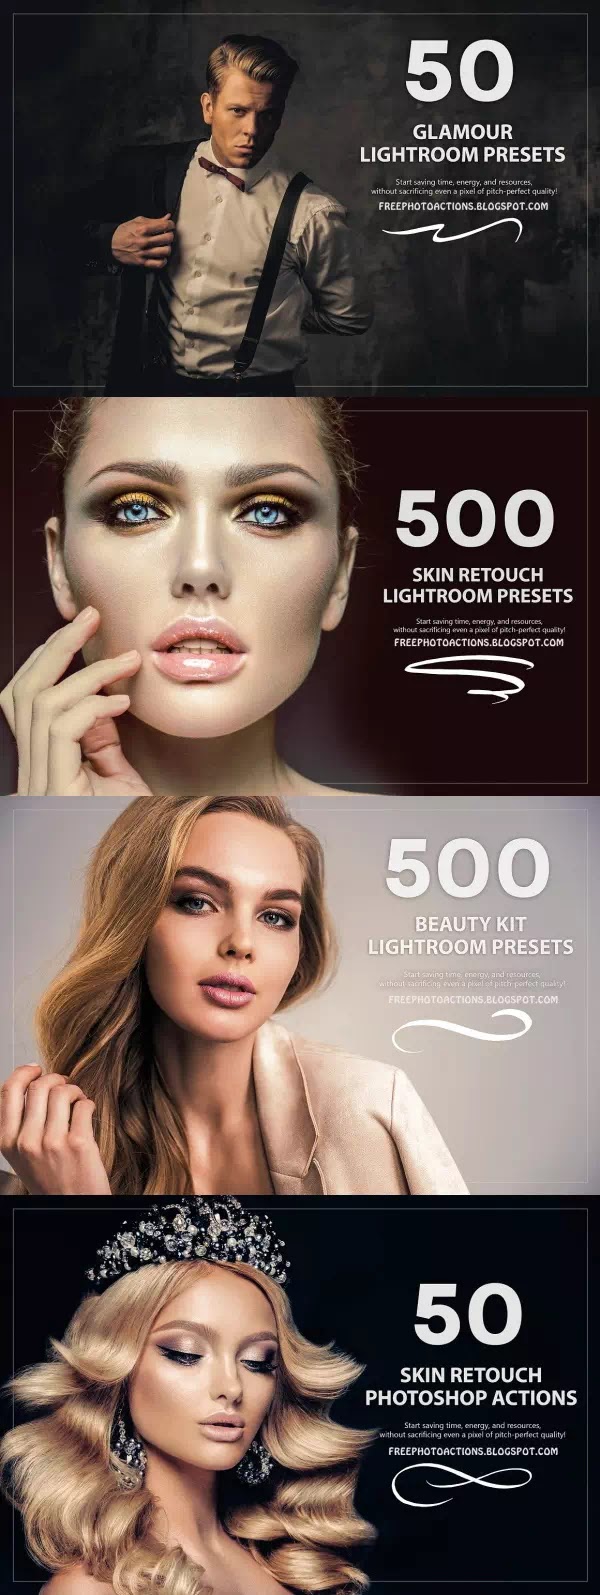 1600-all-in-one-retouch-bundle-2